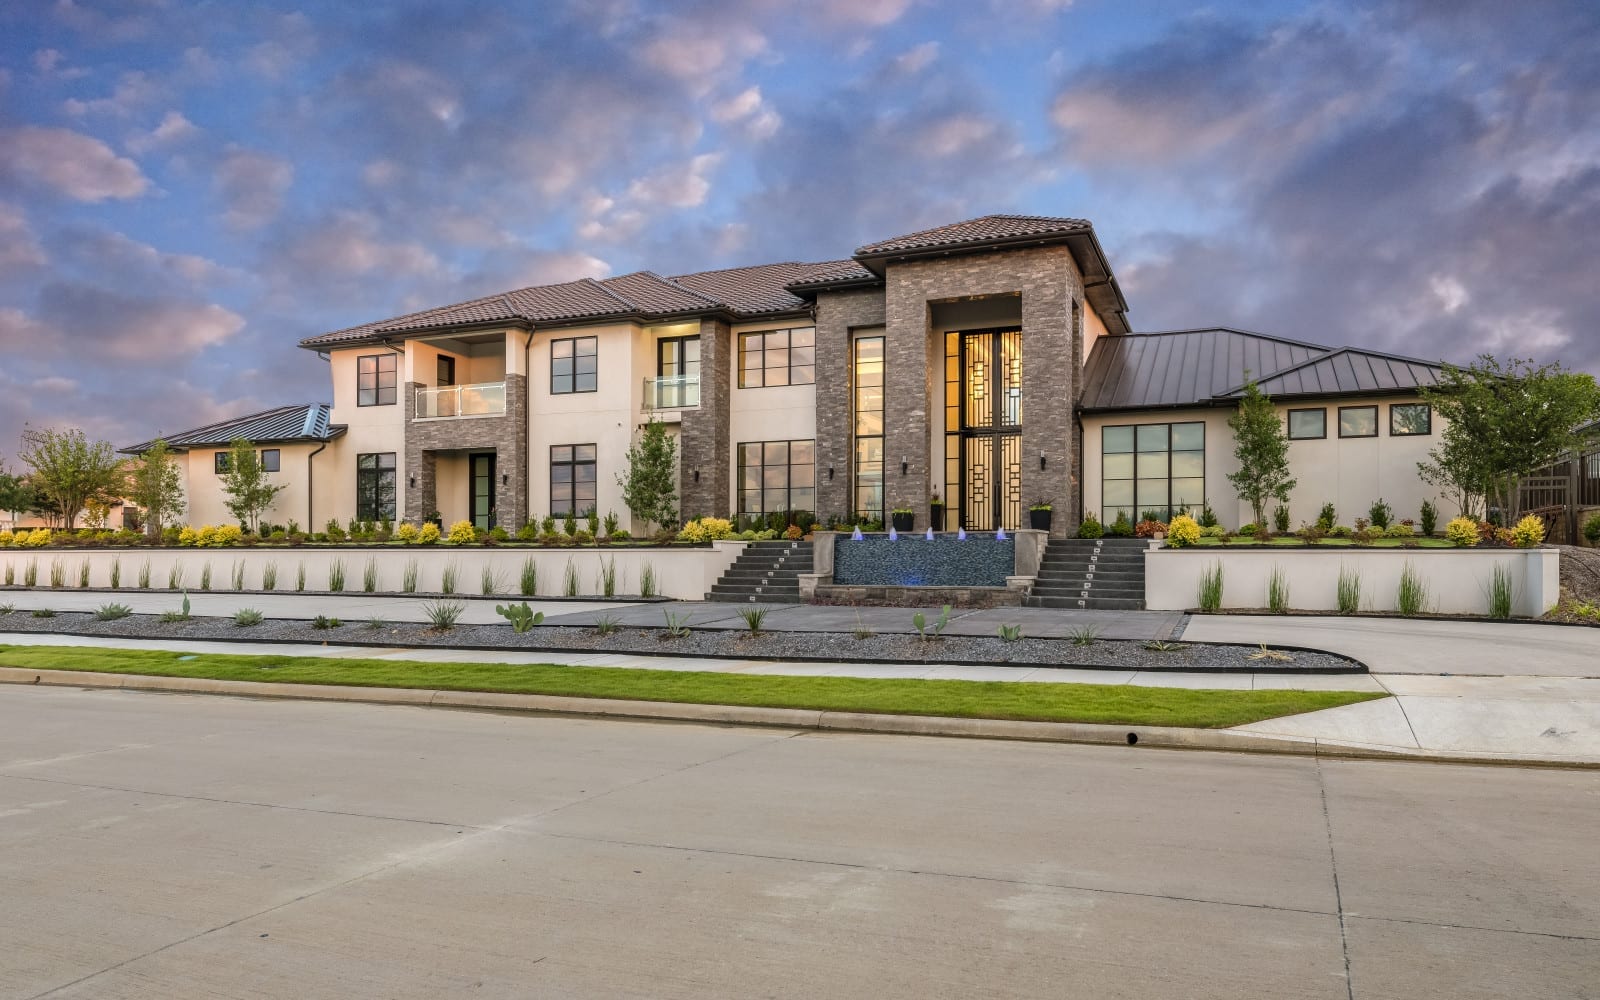 Modern Custom Modern Home Build and Interior Design from Millennial Design + Build, Frisco Luxury Home Builders in Texas